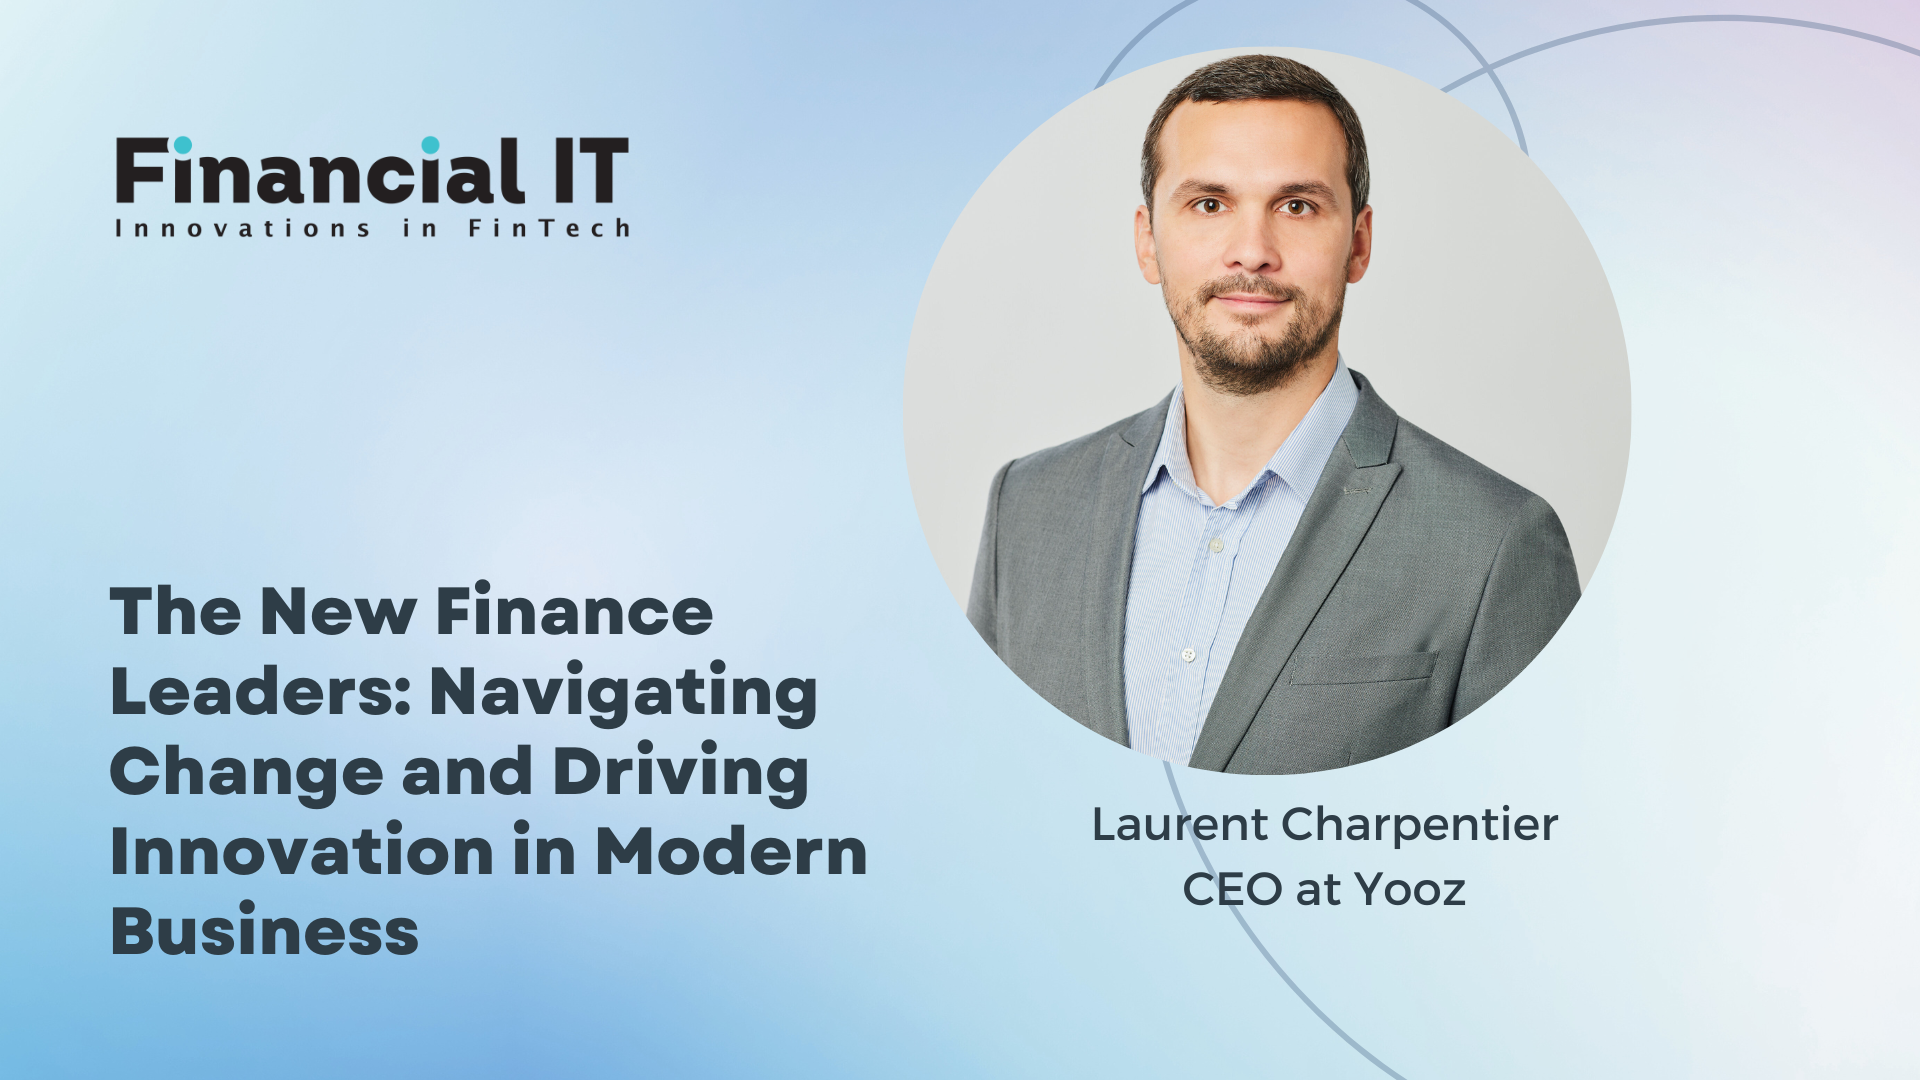 The New Finance Leaders: Navigating Change and Driving Innovation in Modern Business